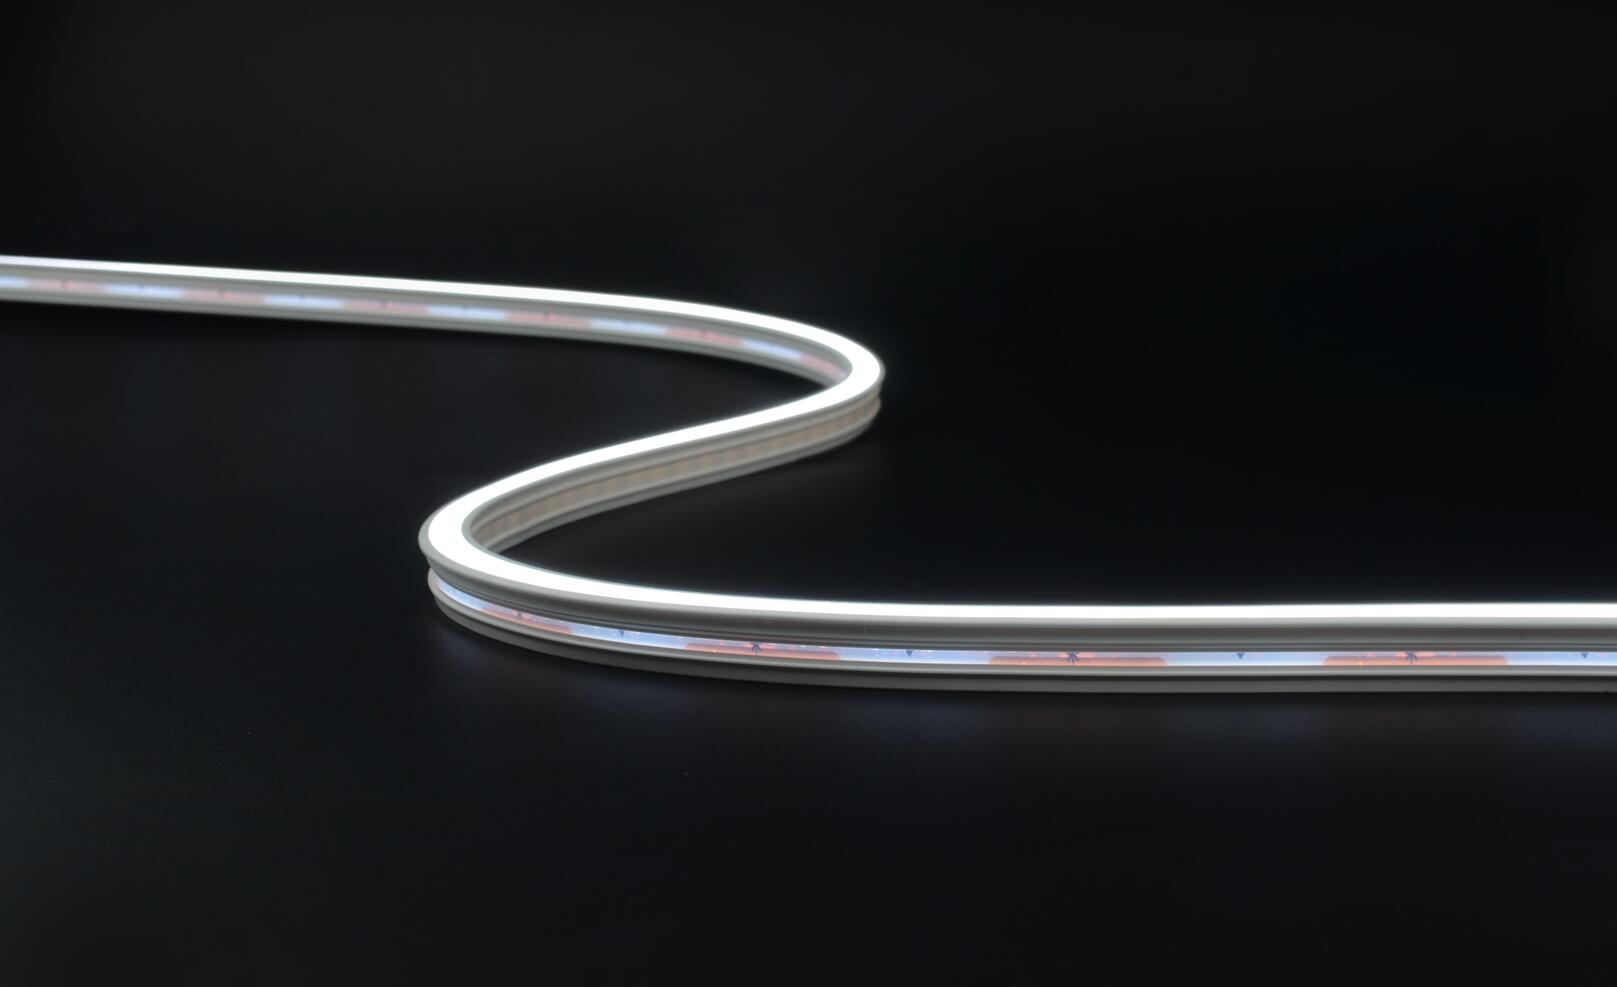 Embedded LED Neon Flex sideview 6x12mm